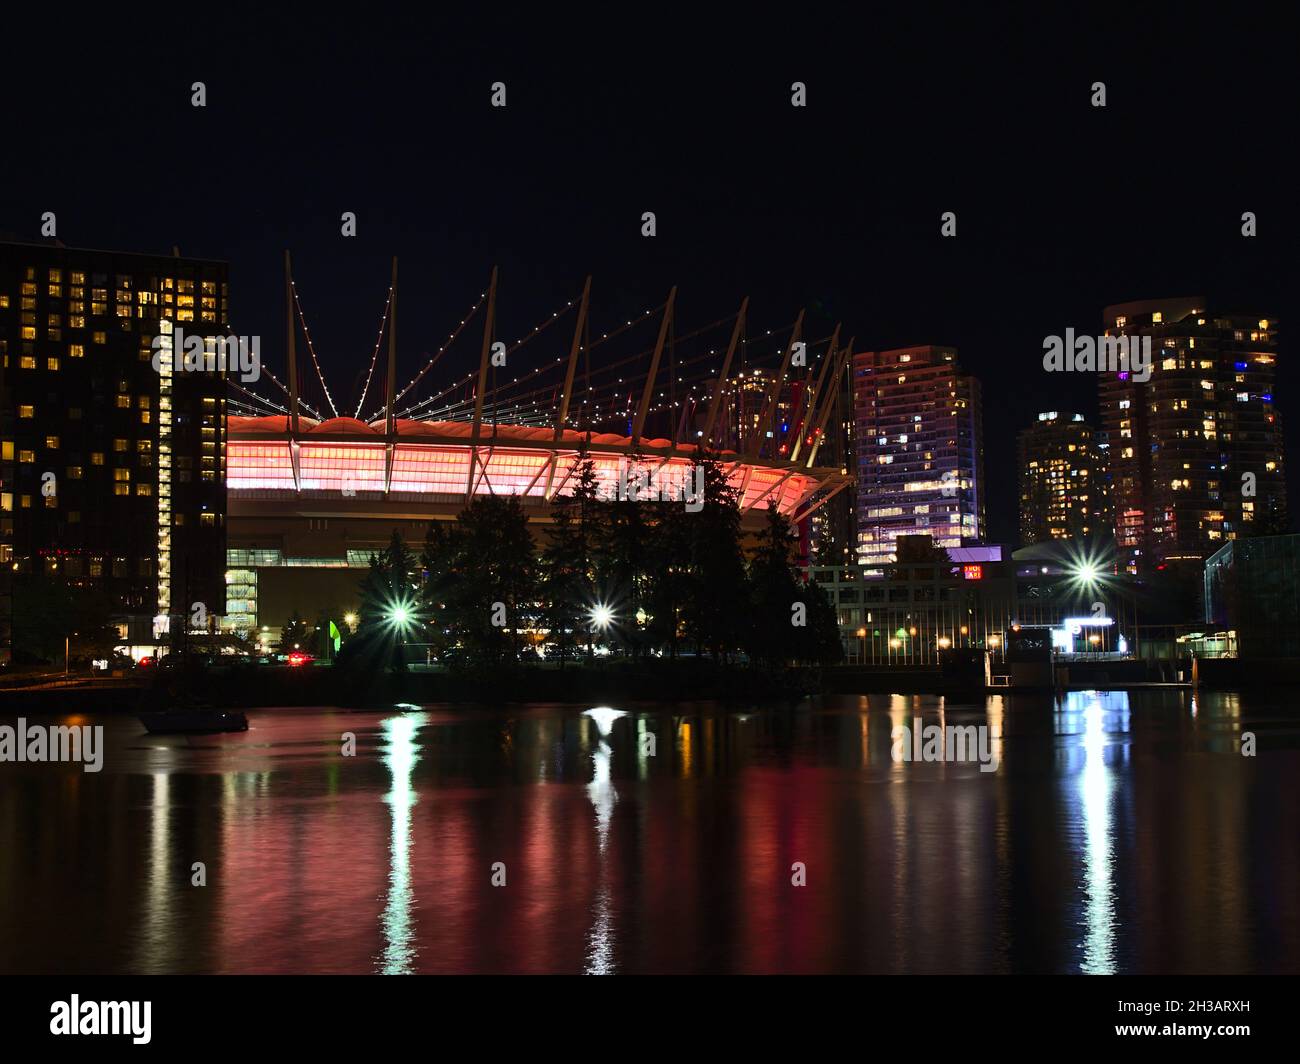 Stunning night view of False Creek bay, Vancouver downtown with illuminated BC Place Stadium reflected in the calm water and residential buildings. Stock Photo